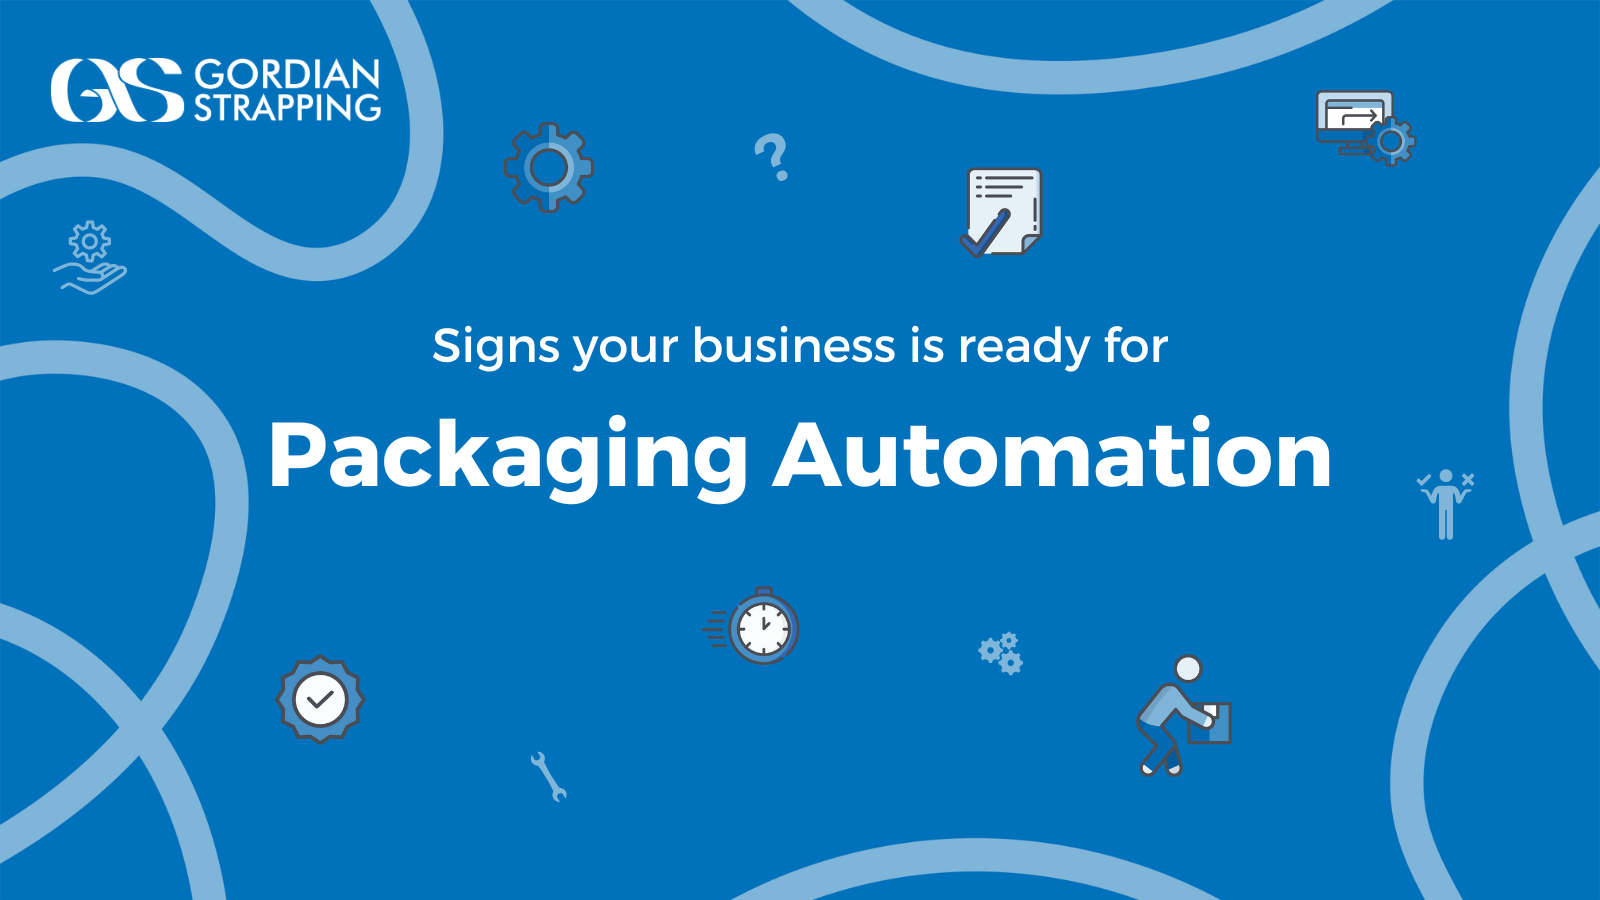 Signs Your Business is Ready for Packaging Automation